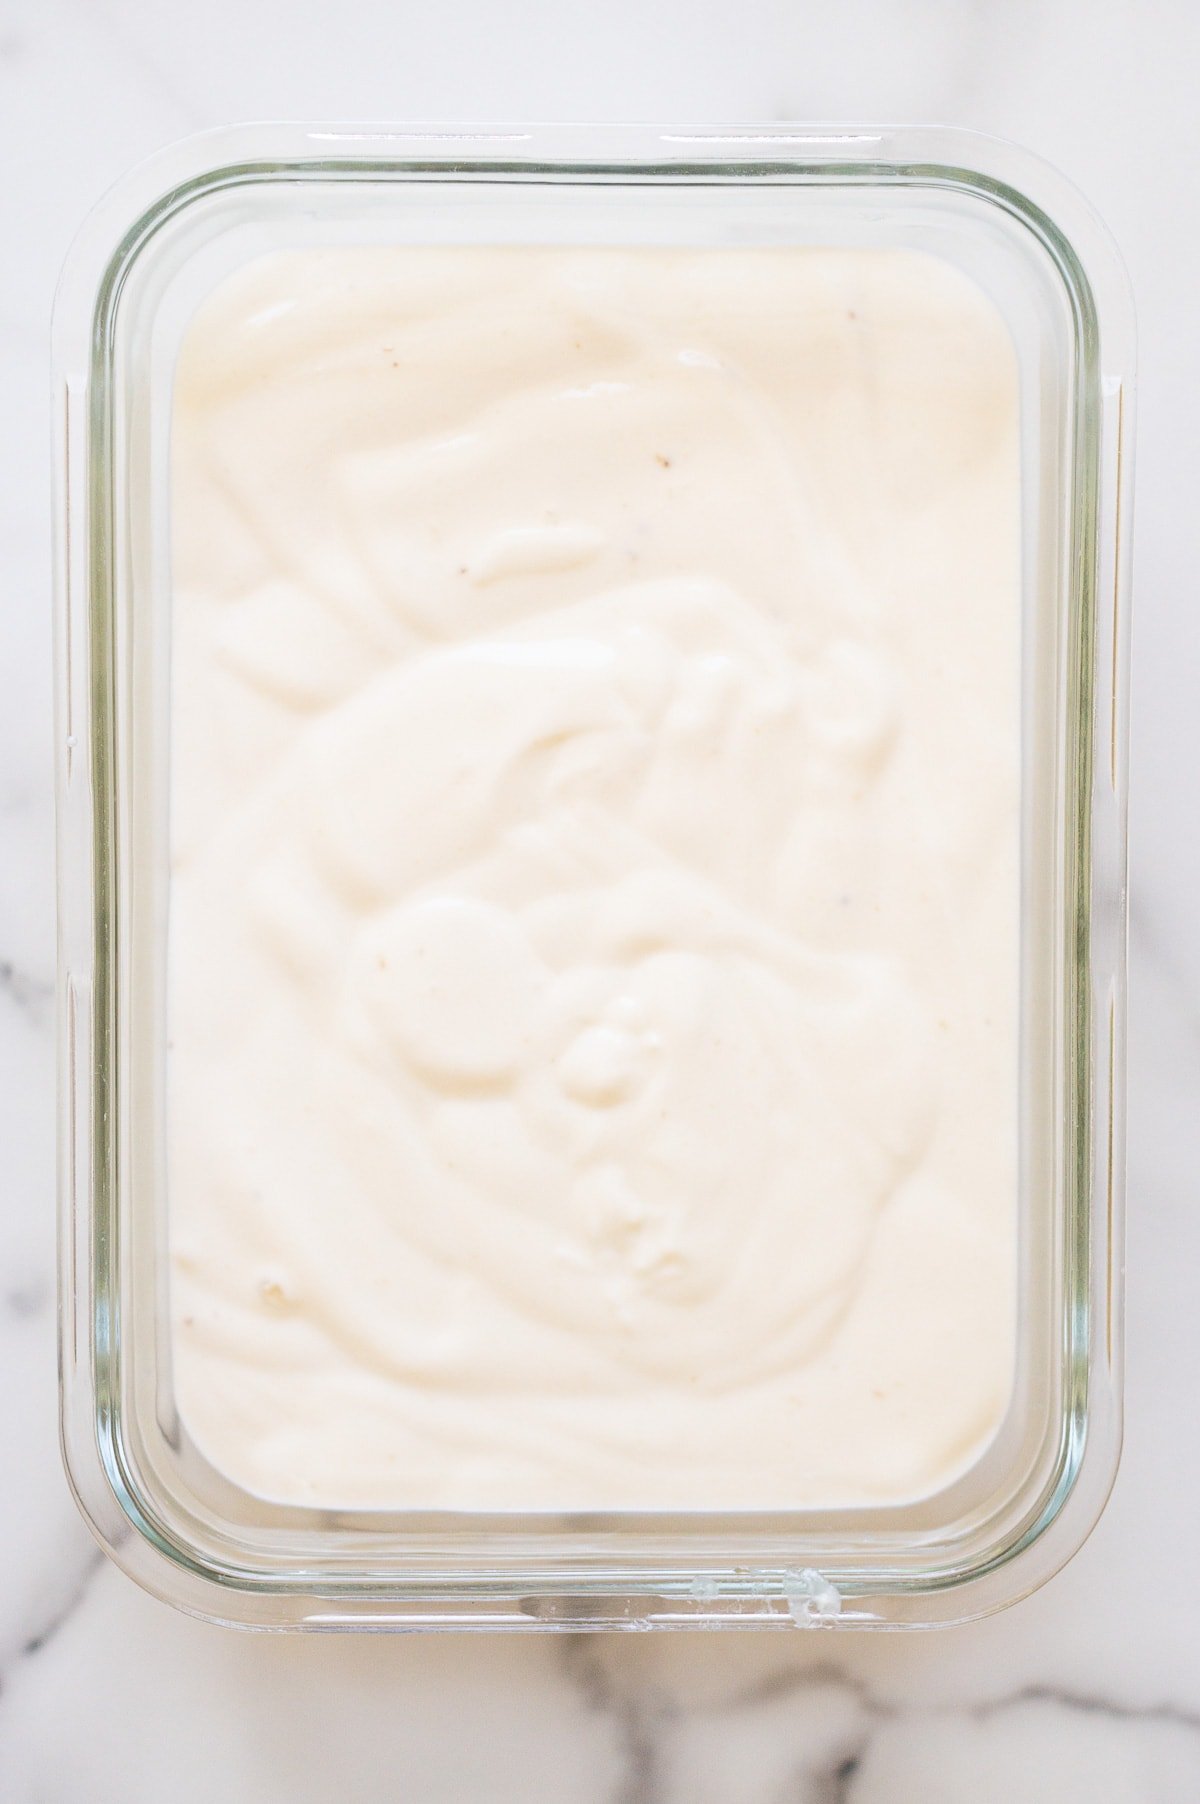 Banana cottage cheese ice cream in glass container before freezing.